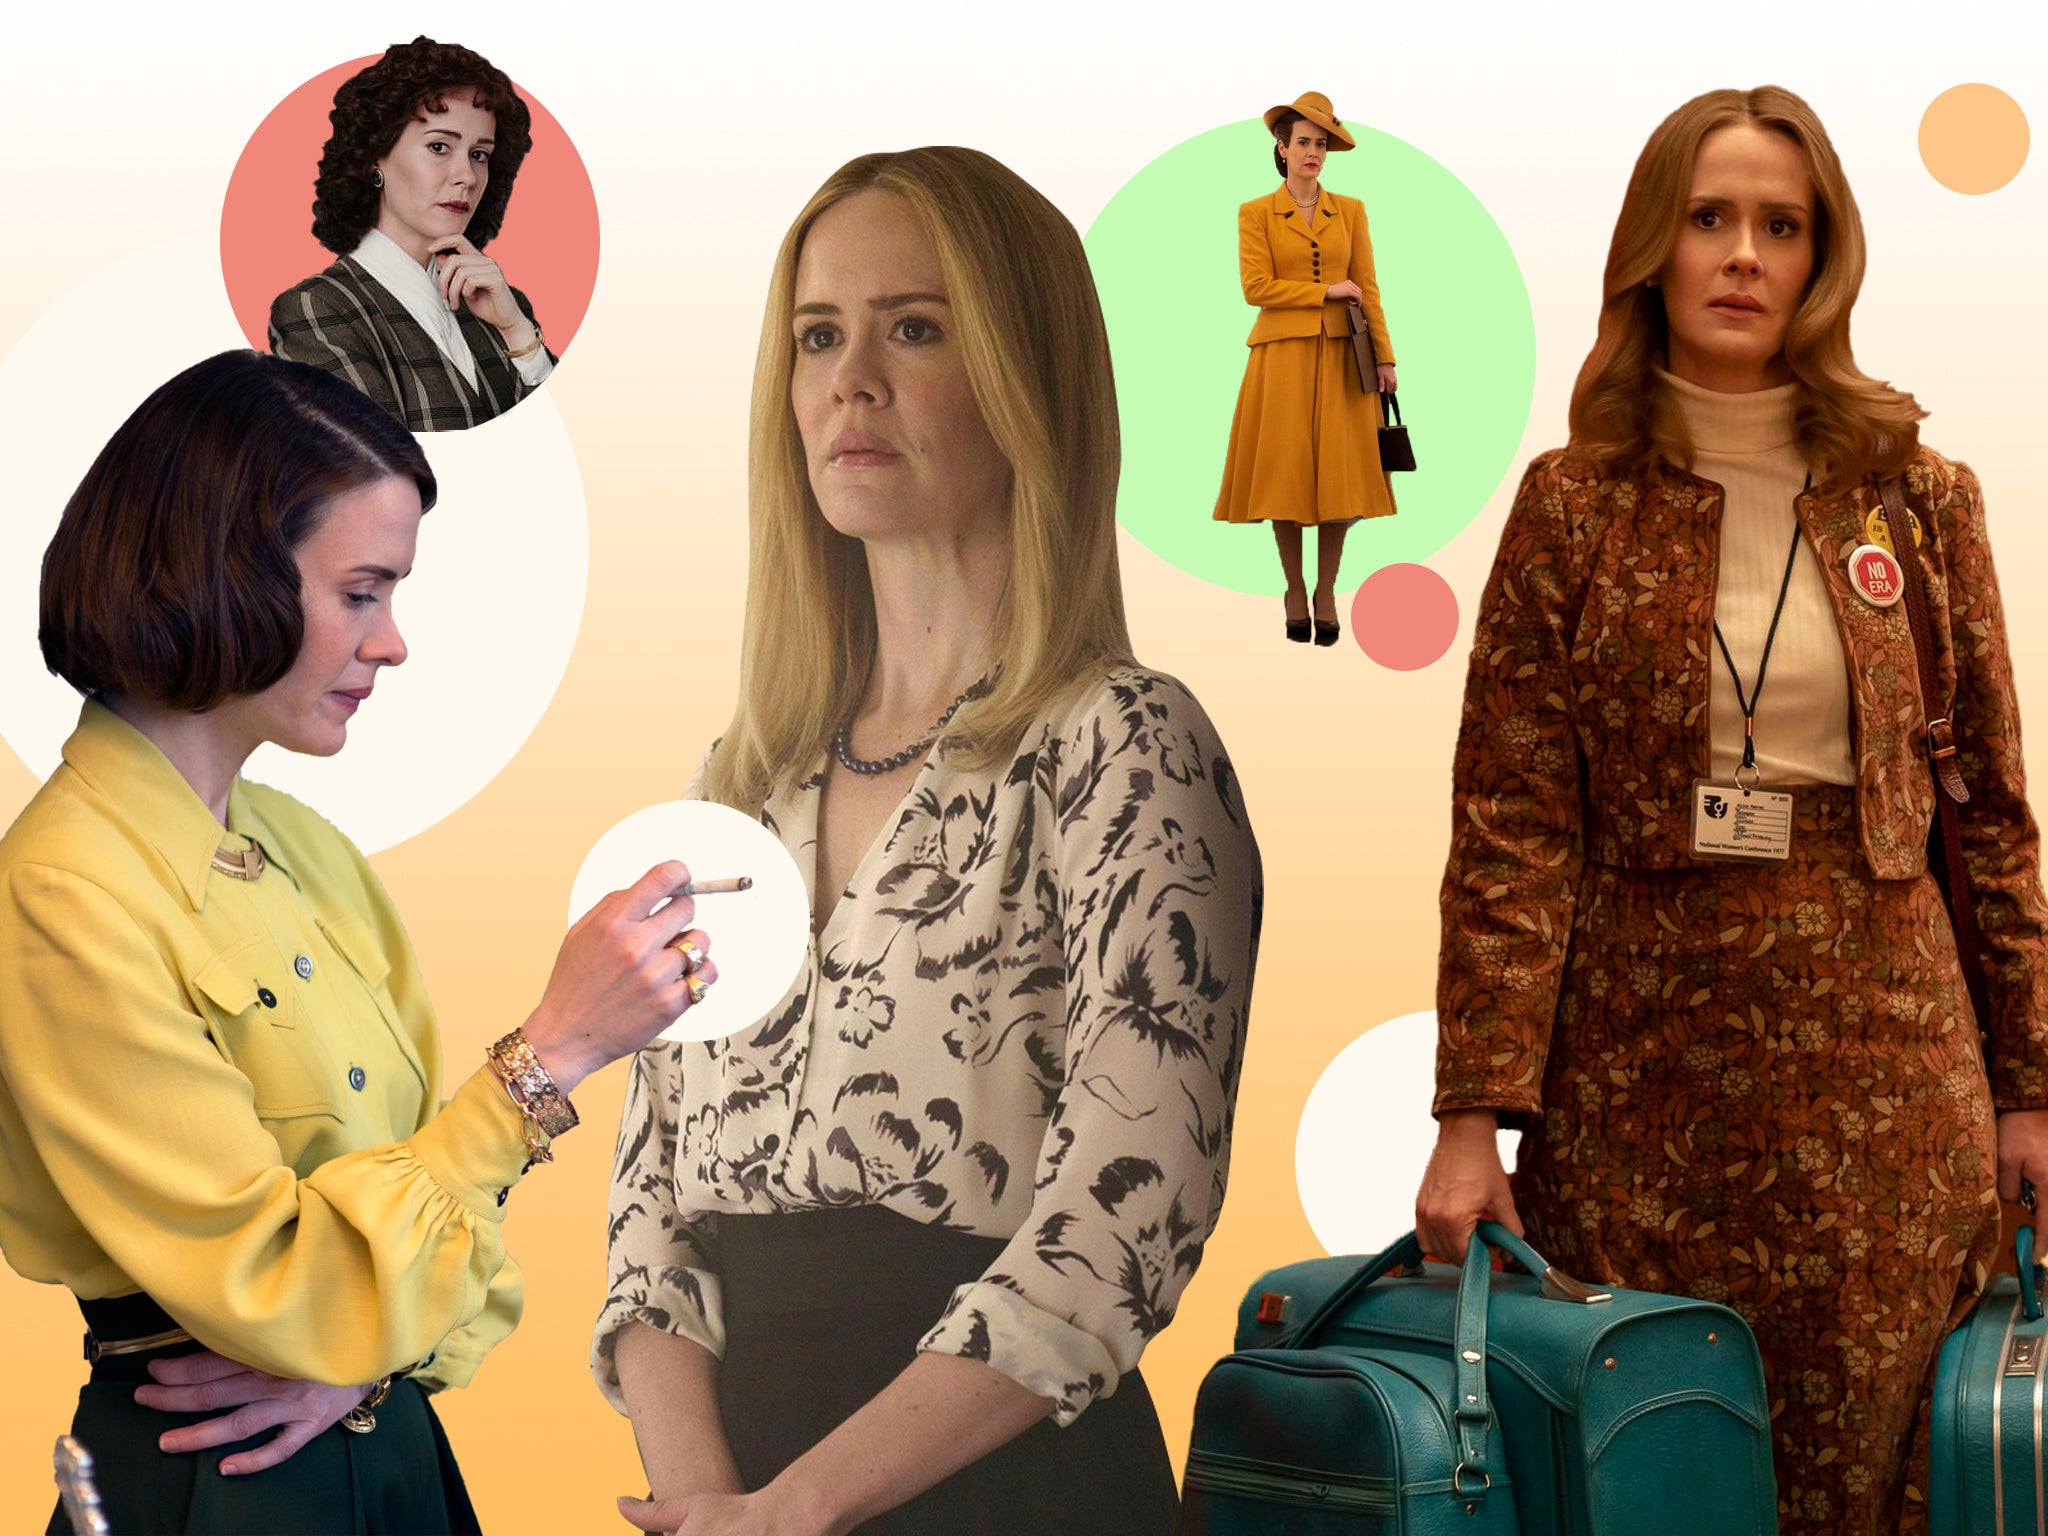 She succeeds in turning every part, no matter how unlikely, into a Sarah Paulson part